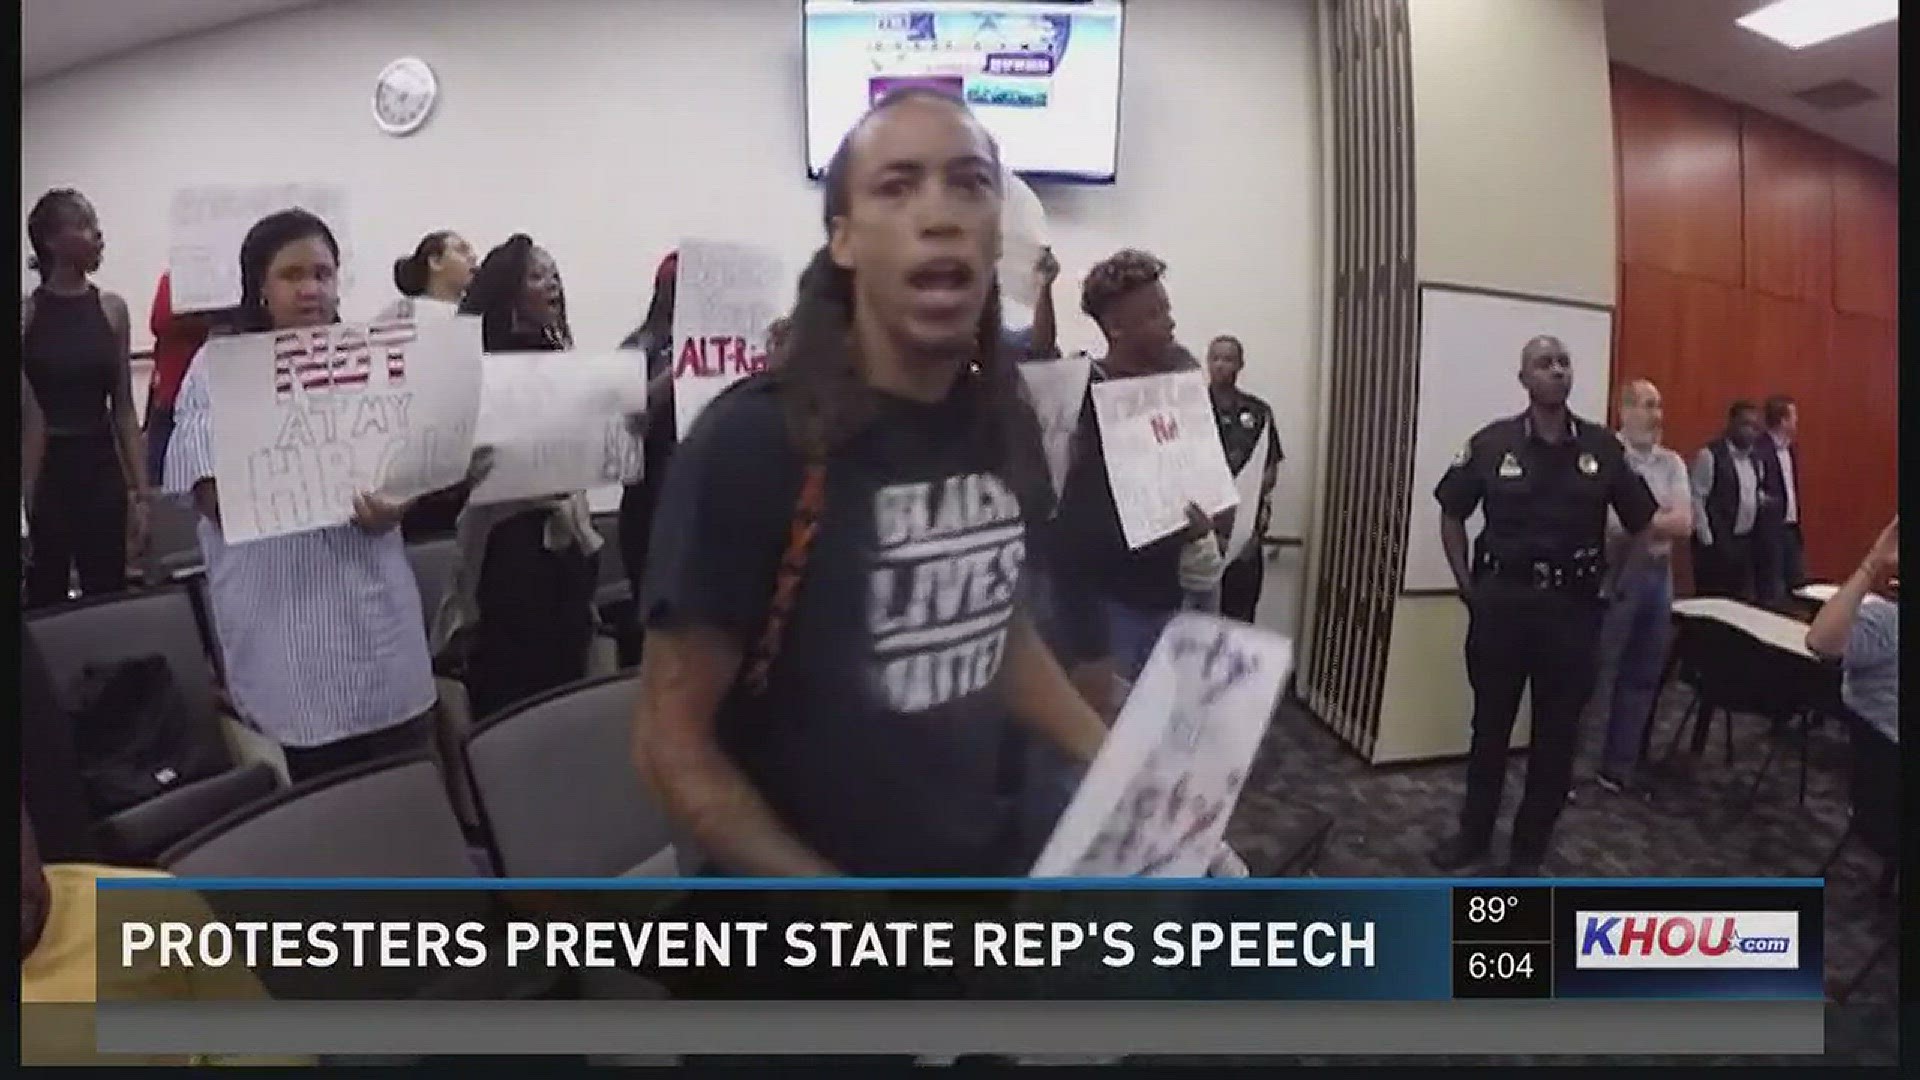 After dozens of protesters filed into an event at Texas Southern University featuring House Representative Briscoe Cain, they wouldn't allow Rep. Cain to speak, claiming he has ties to the Alt-Right and is anti-LGBT.